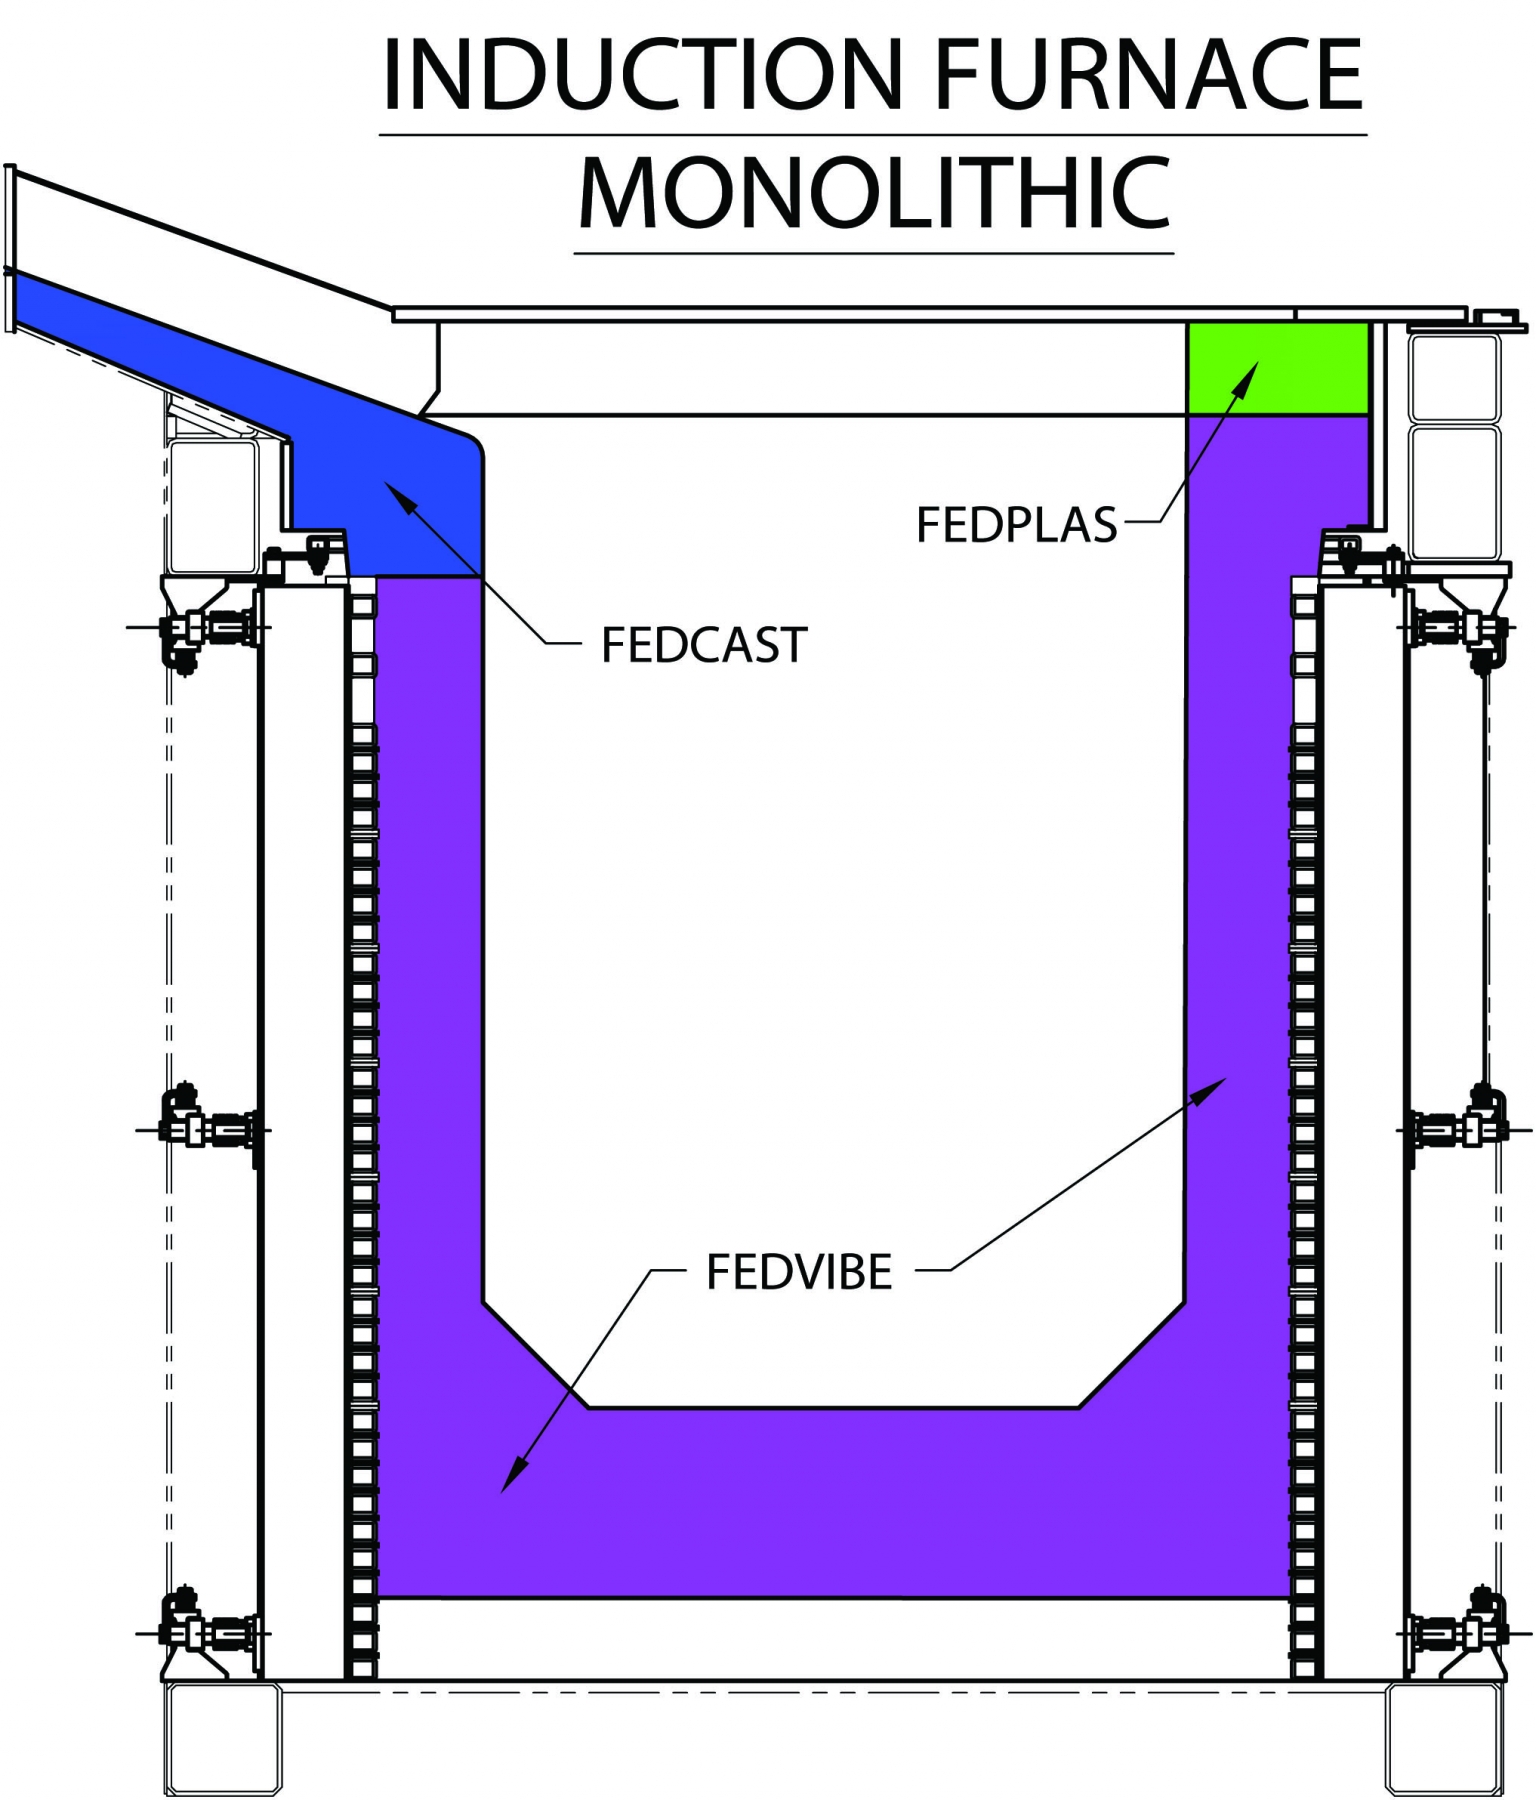 diagram showing induction furnace monolithic